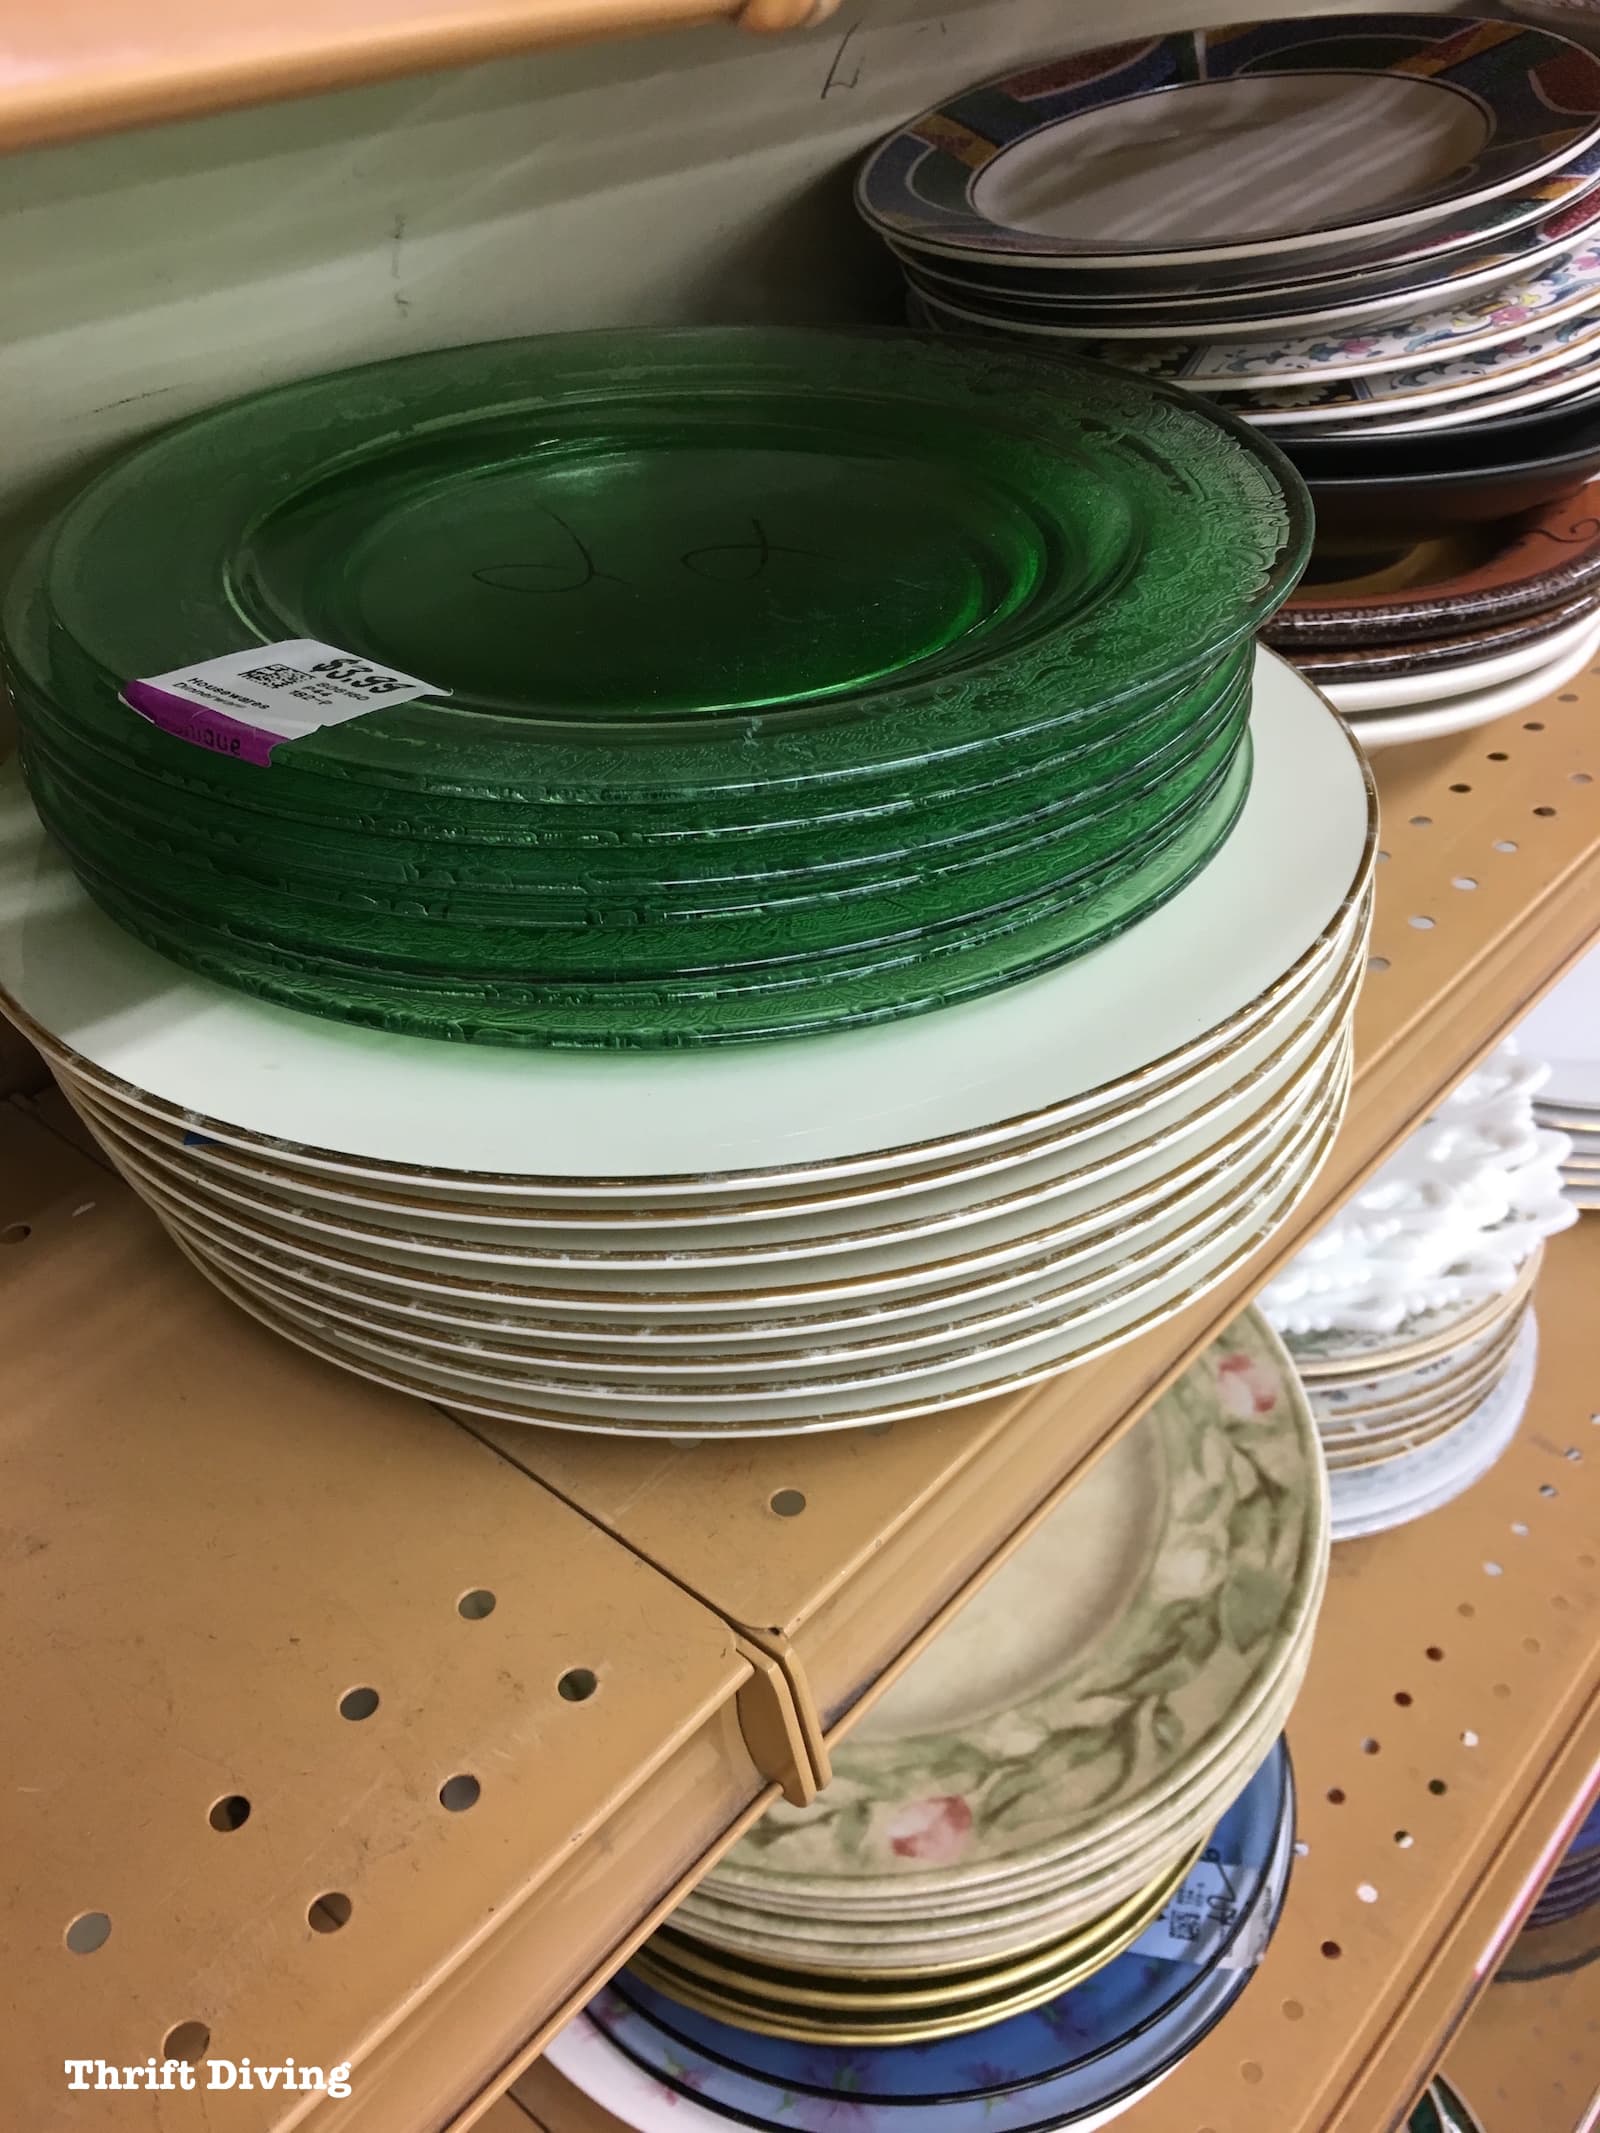 How to Shop Thrift Stores - Thrift store glass plates. - Thrift Diving